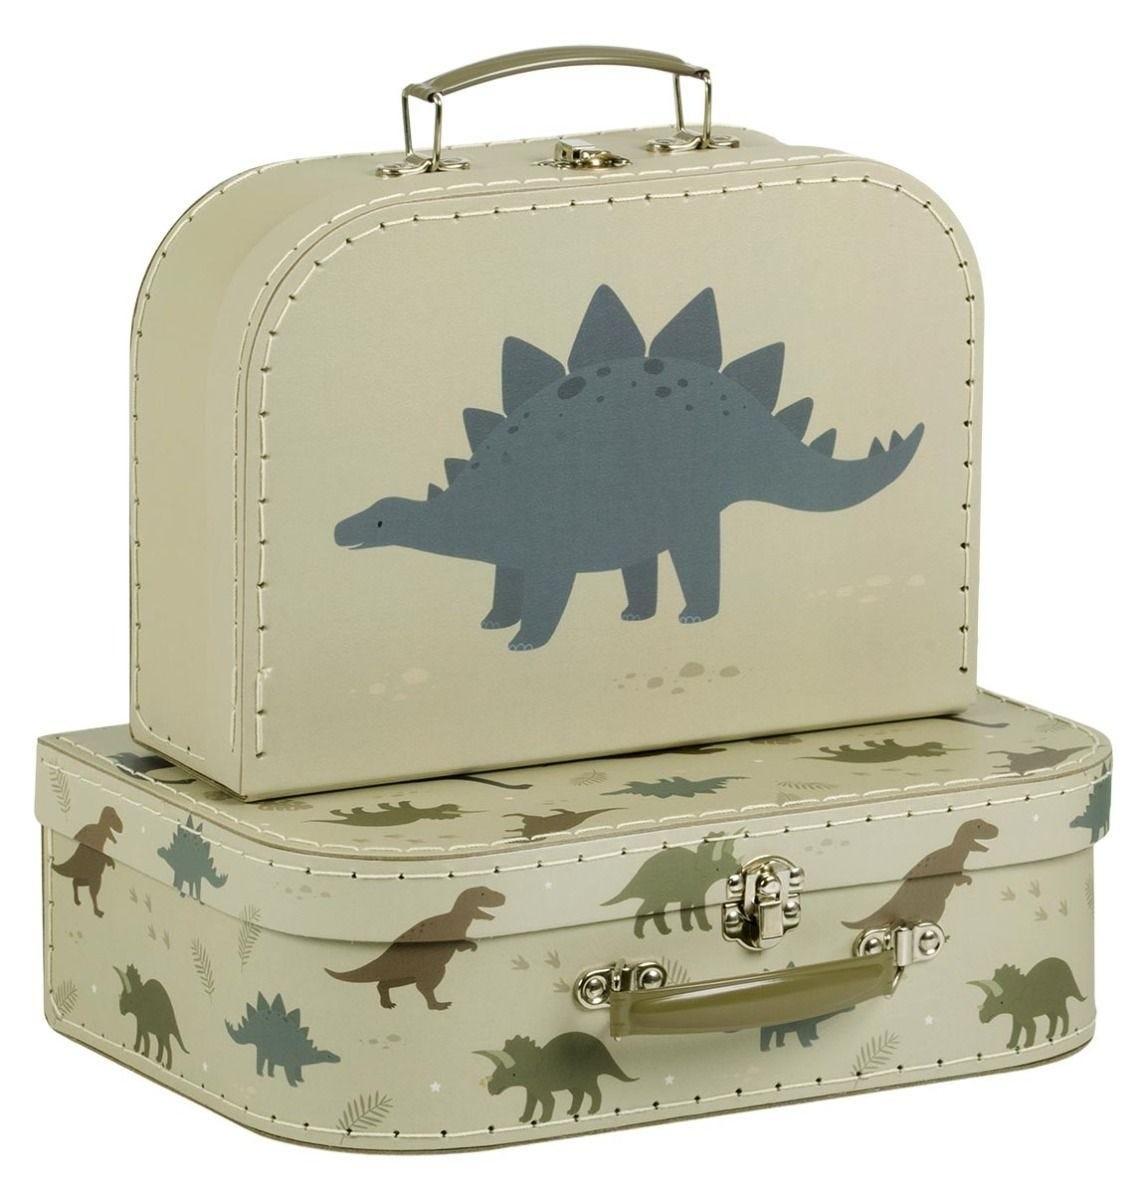 A little Lovely Company - Suitcase set of 2: Dinosaurs